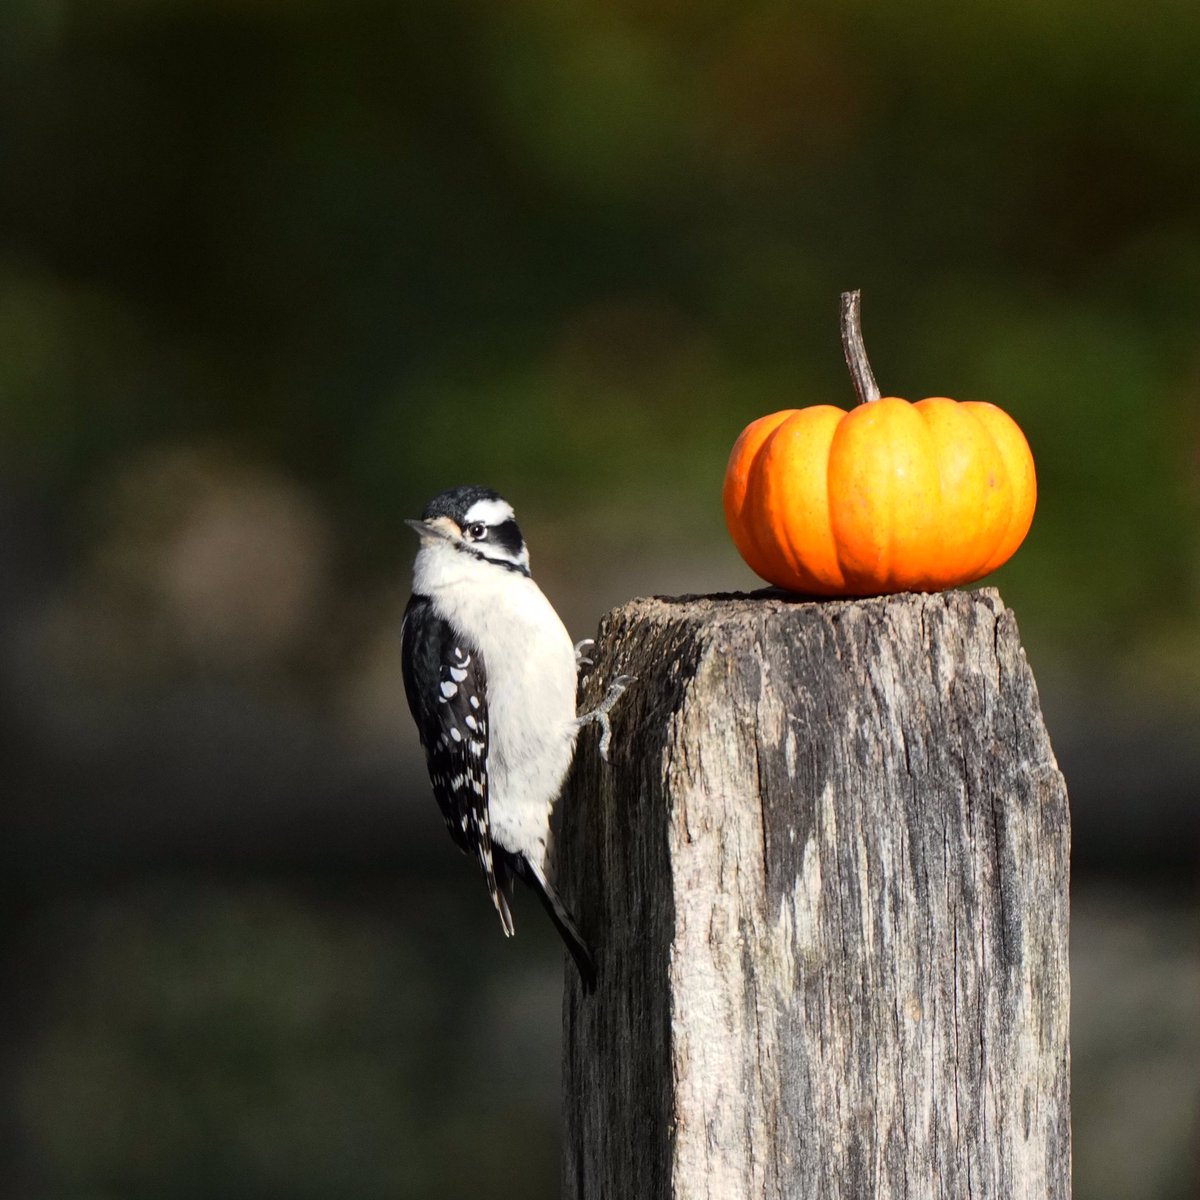 Good thing the pumpkin posed long enough for me to shoot the photo!
The female Downy was very cooperative as well haha.
#birdphotography #wildlifephotography #downywoodpecker #downywoodpeckers #downylovers #pumpkin #pumpkins #pumpkinseason #pumpkineverything #birdphotographer